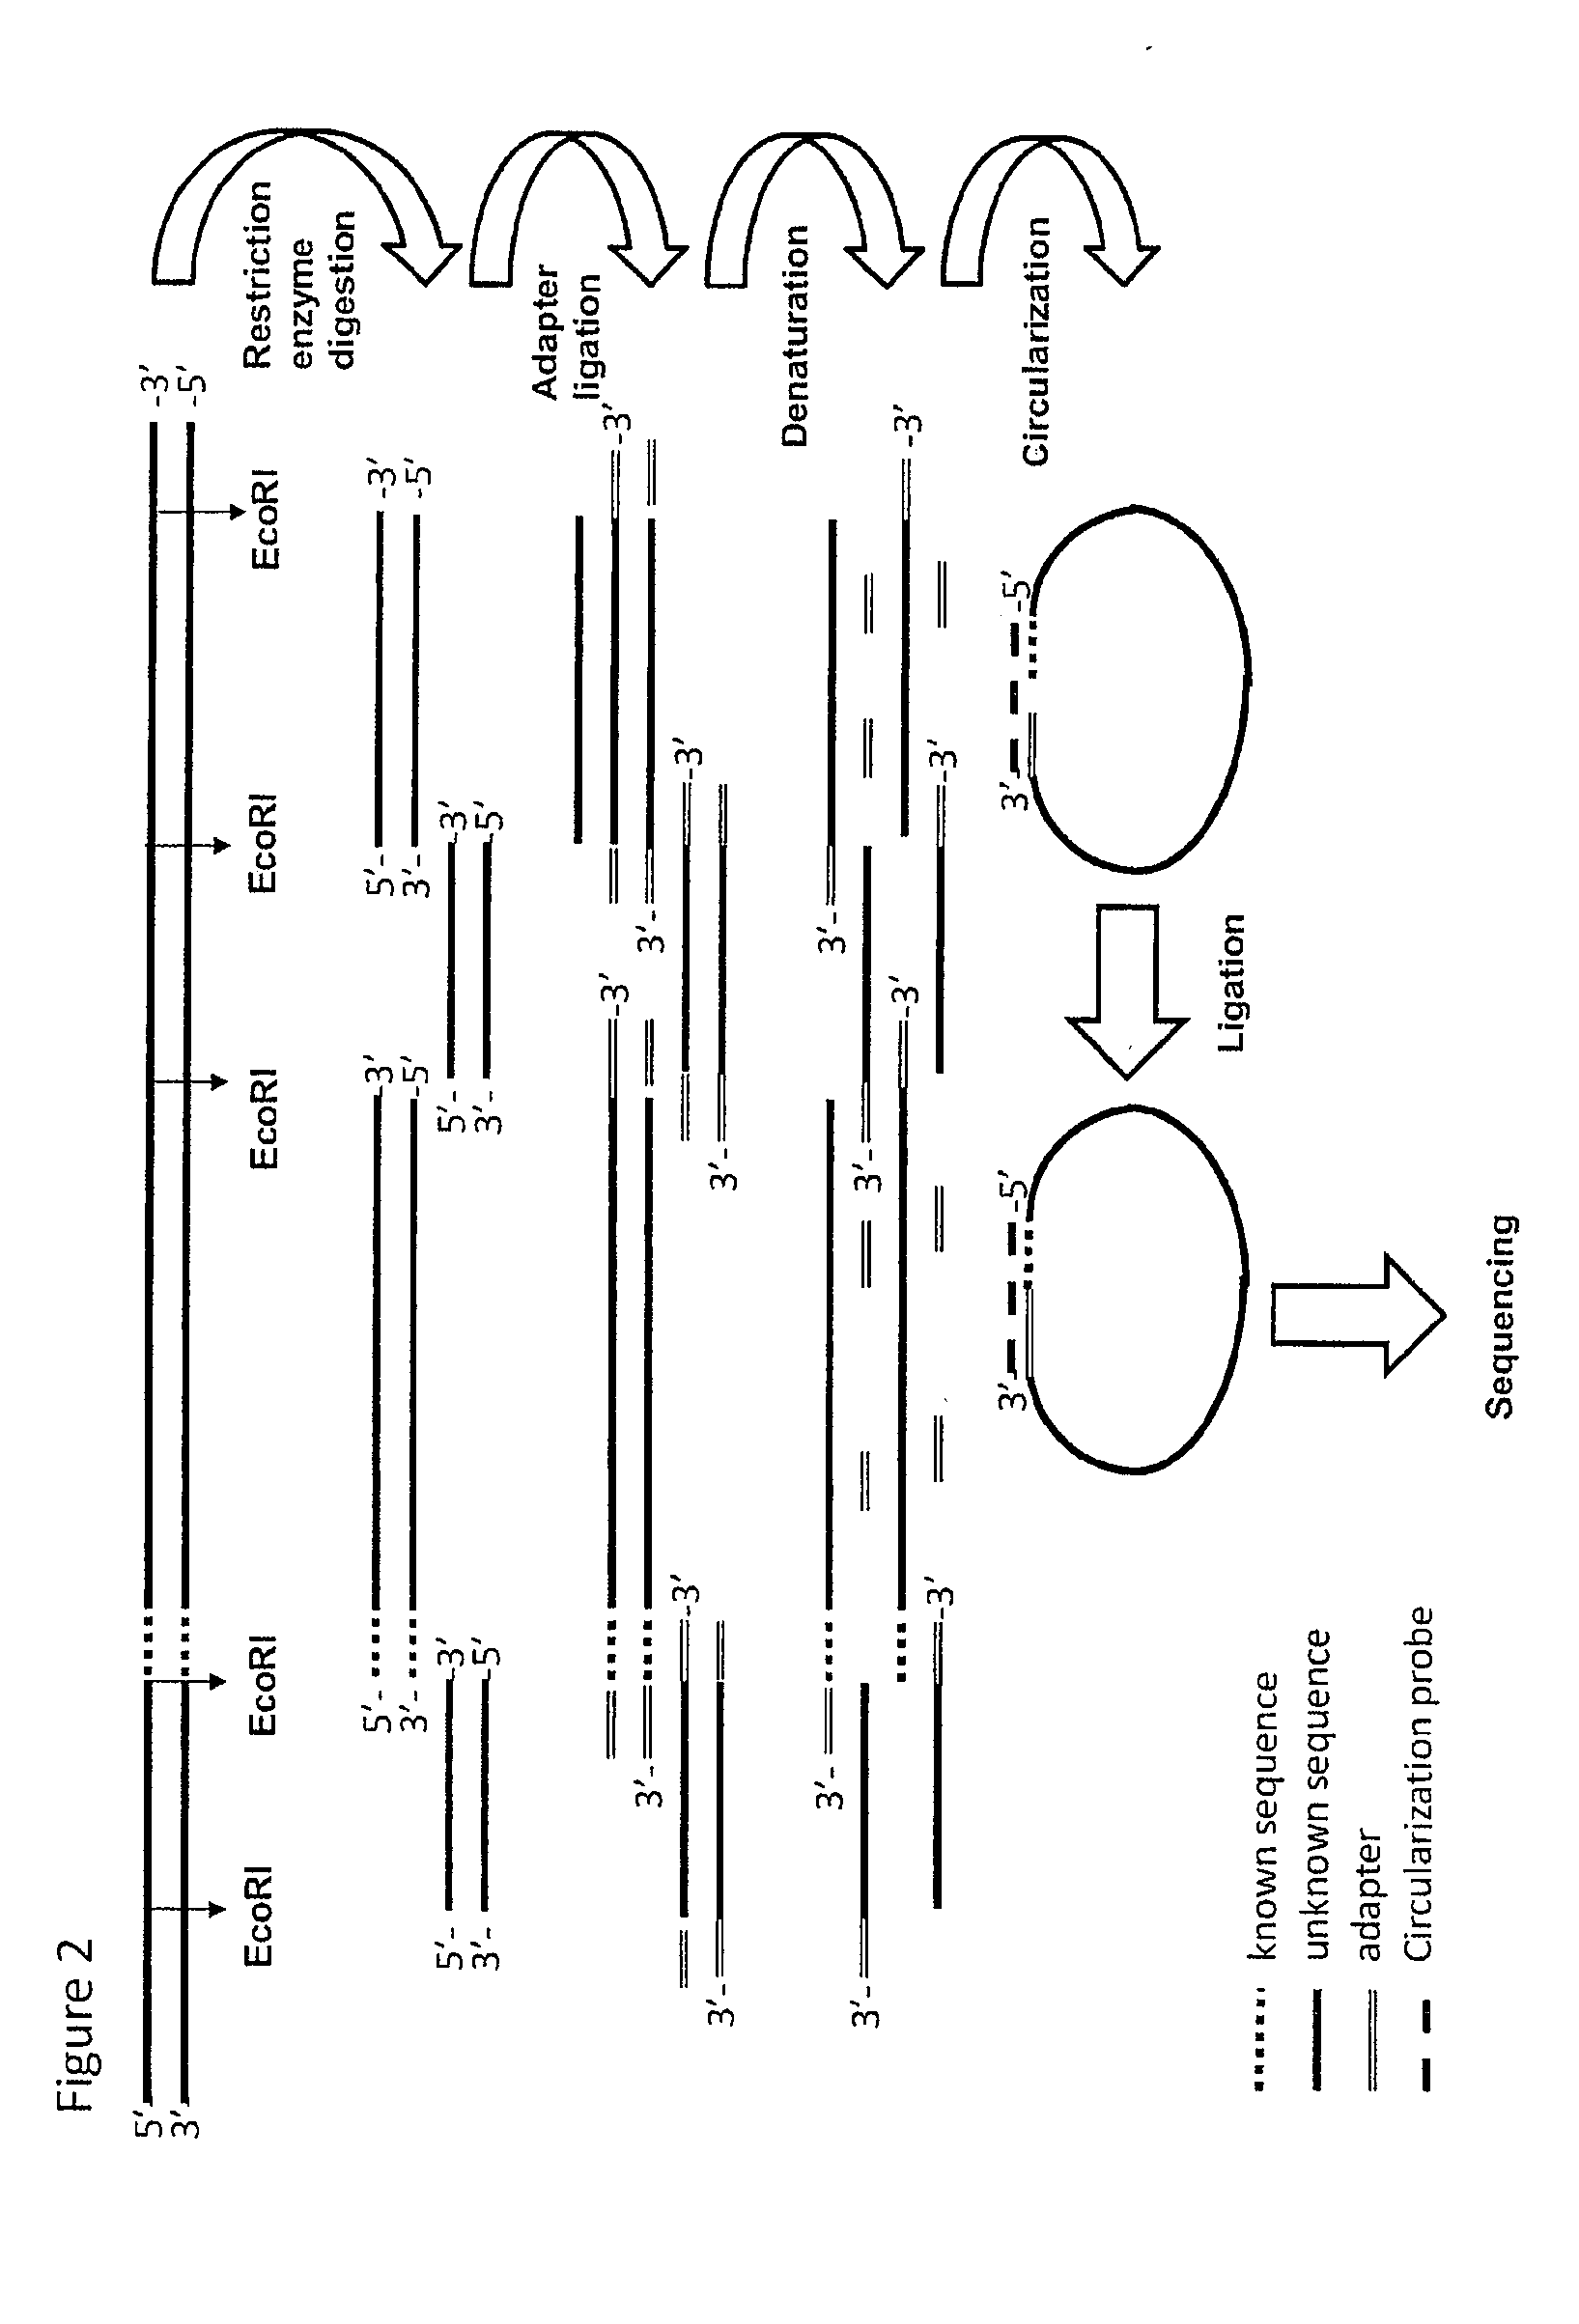 Method for targeted sequencing